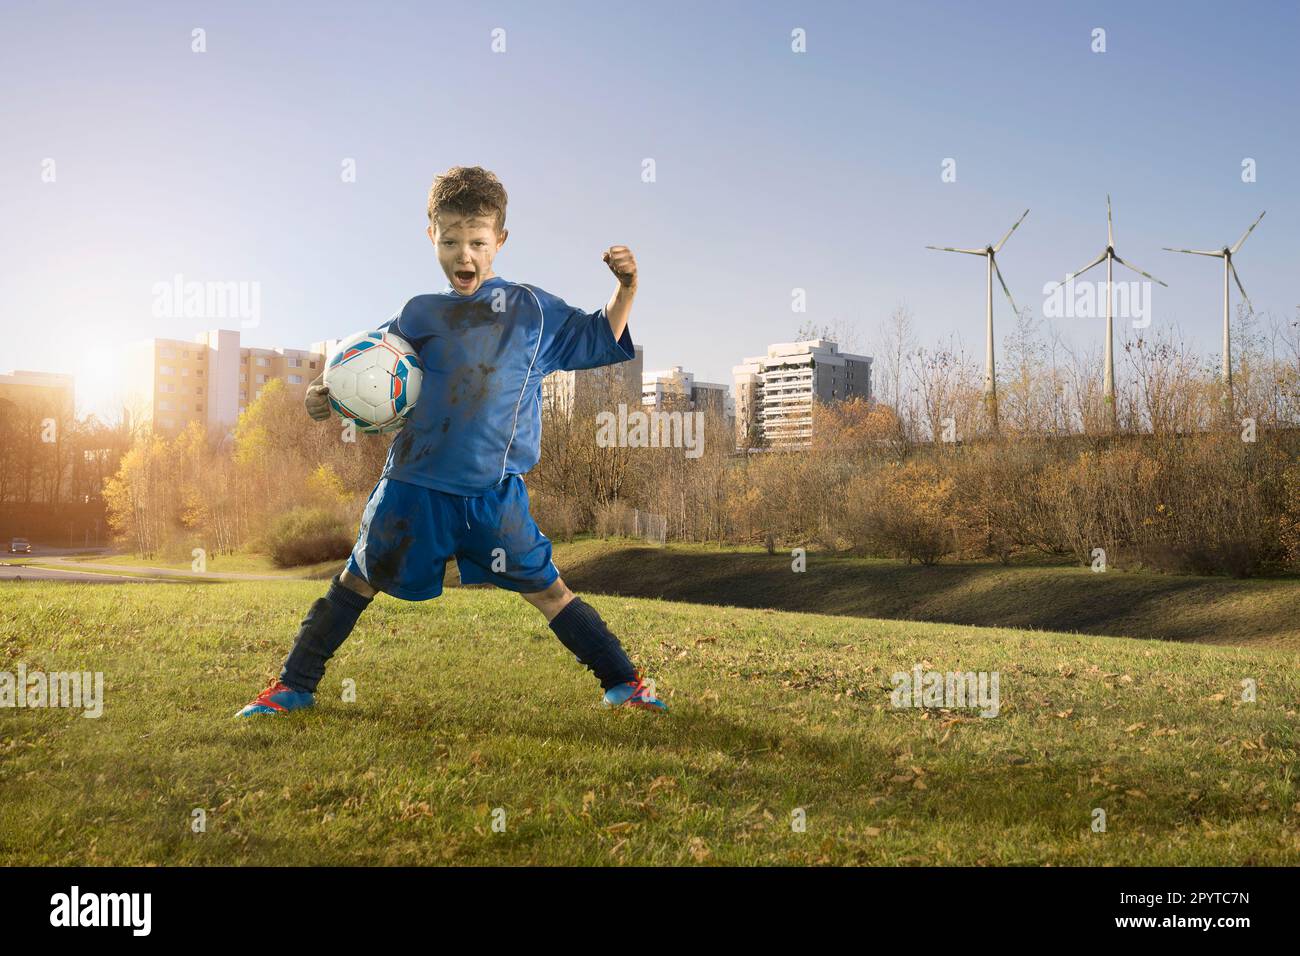 Dirty soccer player cheering on field and wind turbines with city in background, Bavaria, Germany Stock Photo